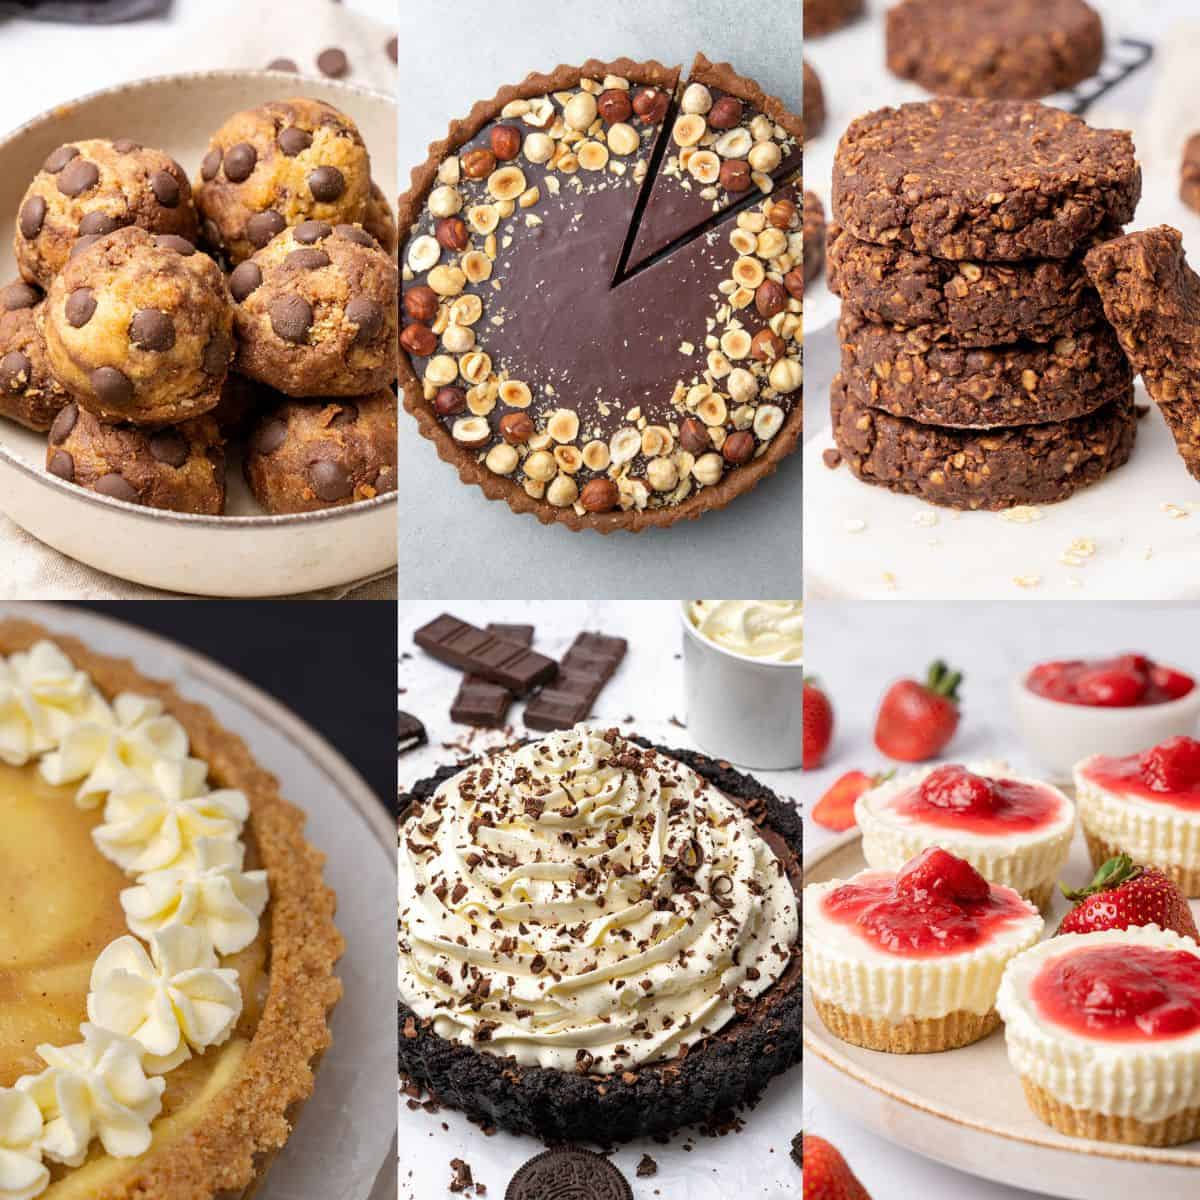 <p>When you need to whip up a quick dessert but don’t have access to an oven, this list of the best <strong><a href="https://www.spatuladesserts.com/no-bake-desserts/">no-bake desserts</a> </strong>will save the day! The following shares 35 sweet and decadent dessert recipes that are easy to make, use simple ingredients and don’t require you to get anywhere near an oven. Whether you make them to enjoy at home or for a group of friends, these no-bake treats will definitely impress!</p><p><strong>Go to the recipes: <a href="https://www.spatuladesserts.com/no-bake-desserts/">No Bake Desserts</a></strong></p>